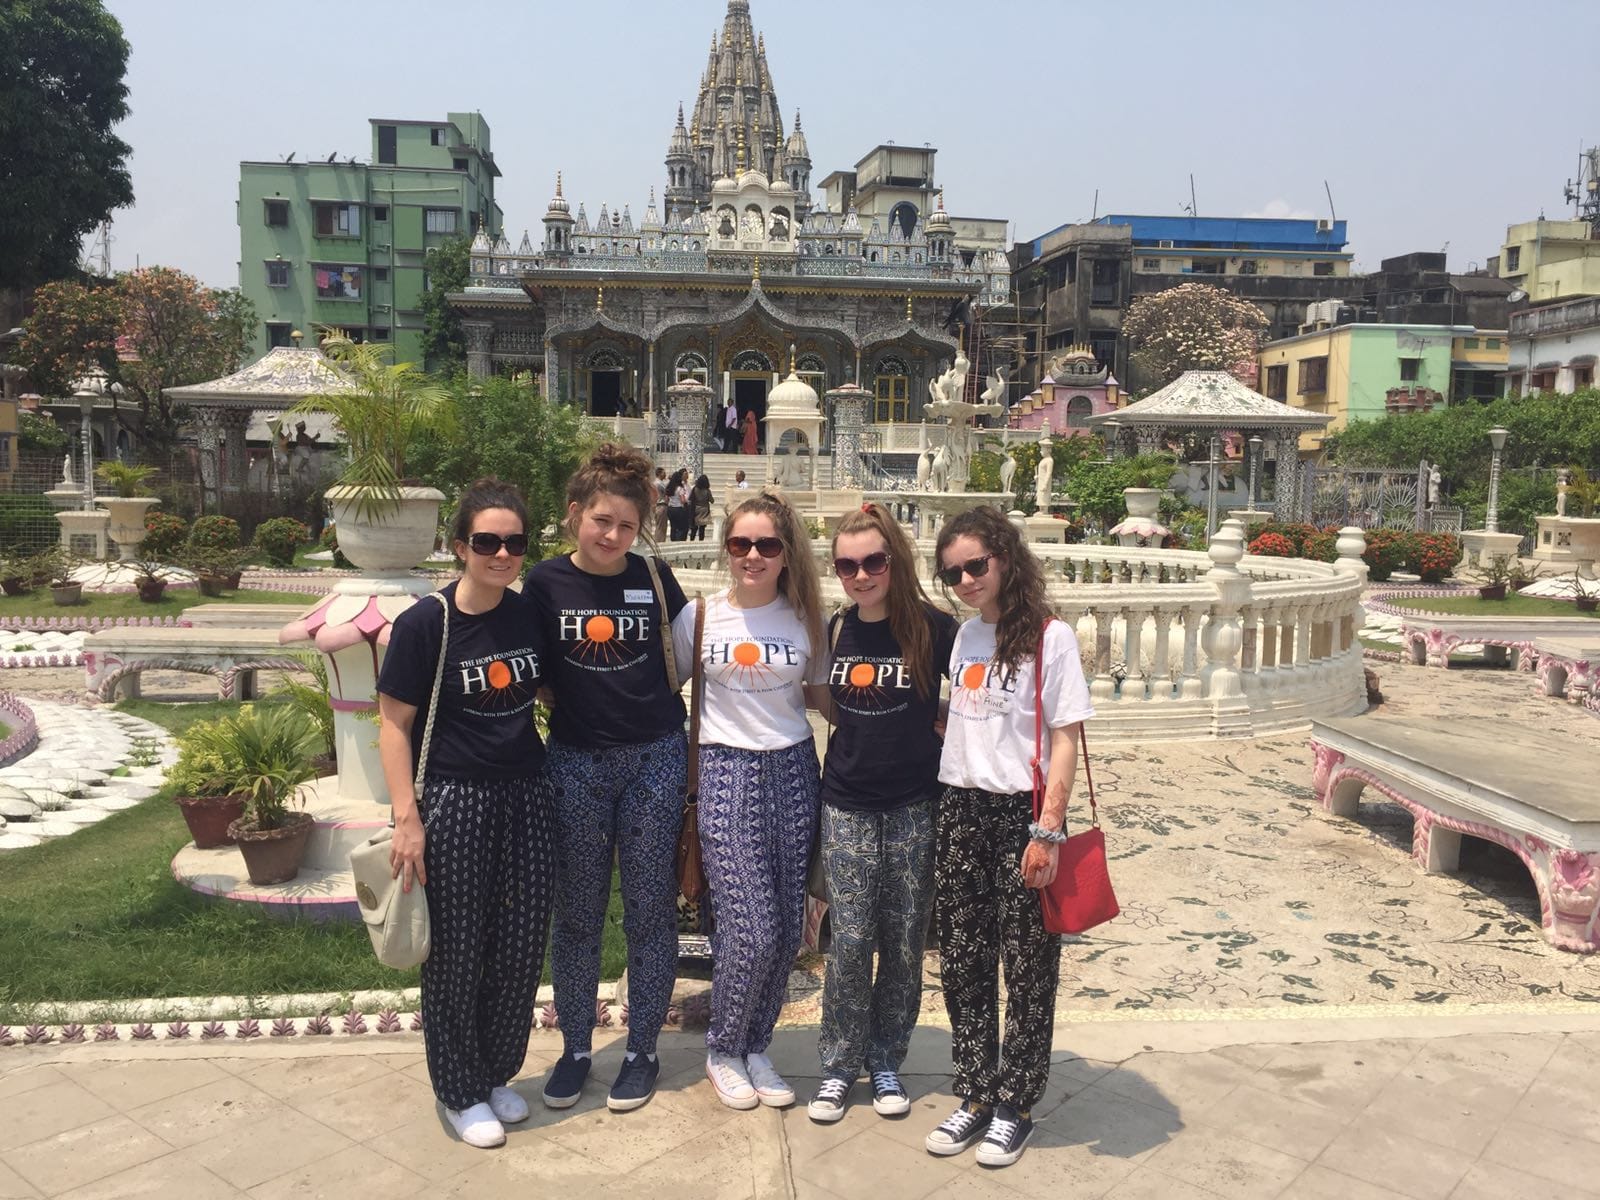 April 2016: The Desmond College teacher and students had an opportunity to explore the beauty of Kolkata on their trip this Easter